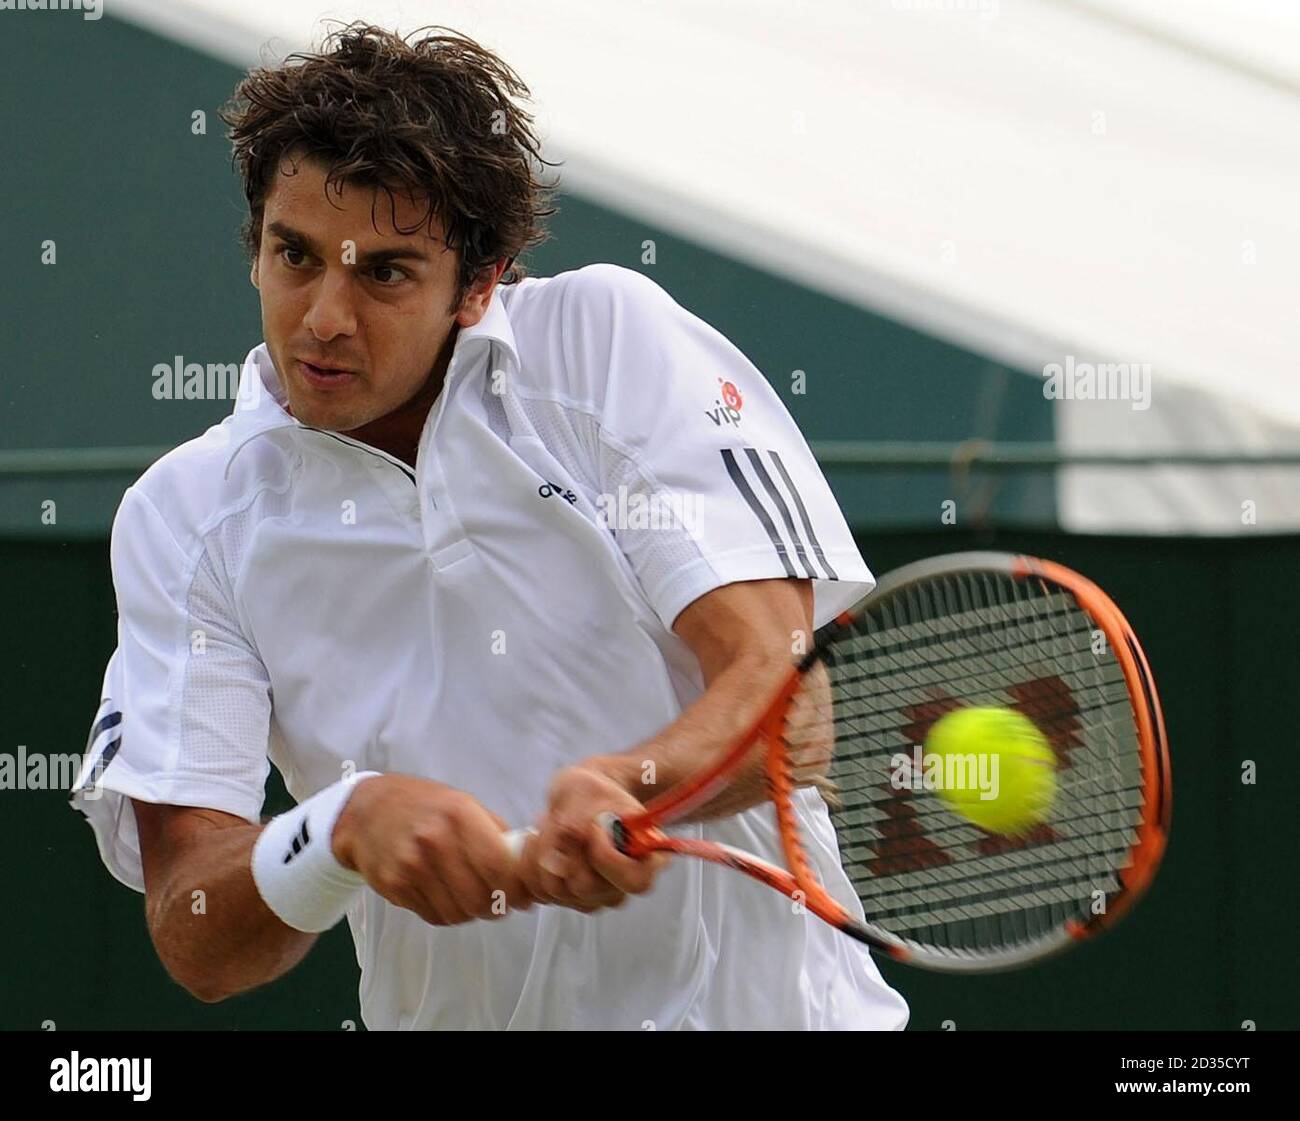 Croatia's Mario Ancic in action against Spain's Fernando Verdasco during the Wimbledon Championships 2008 at the All England tennis Club in Wimbledon. Stock Photo